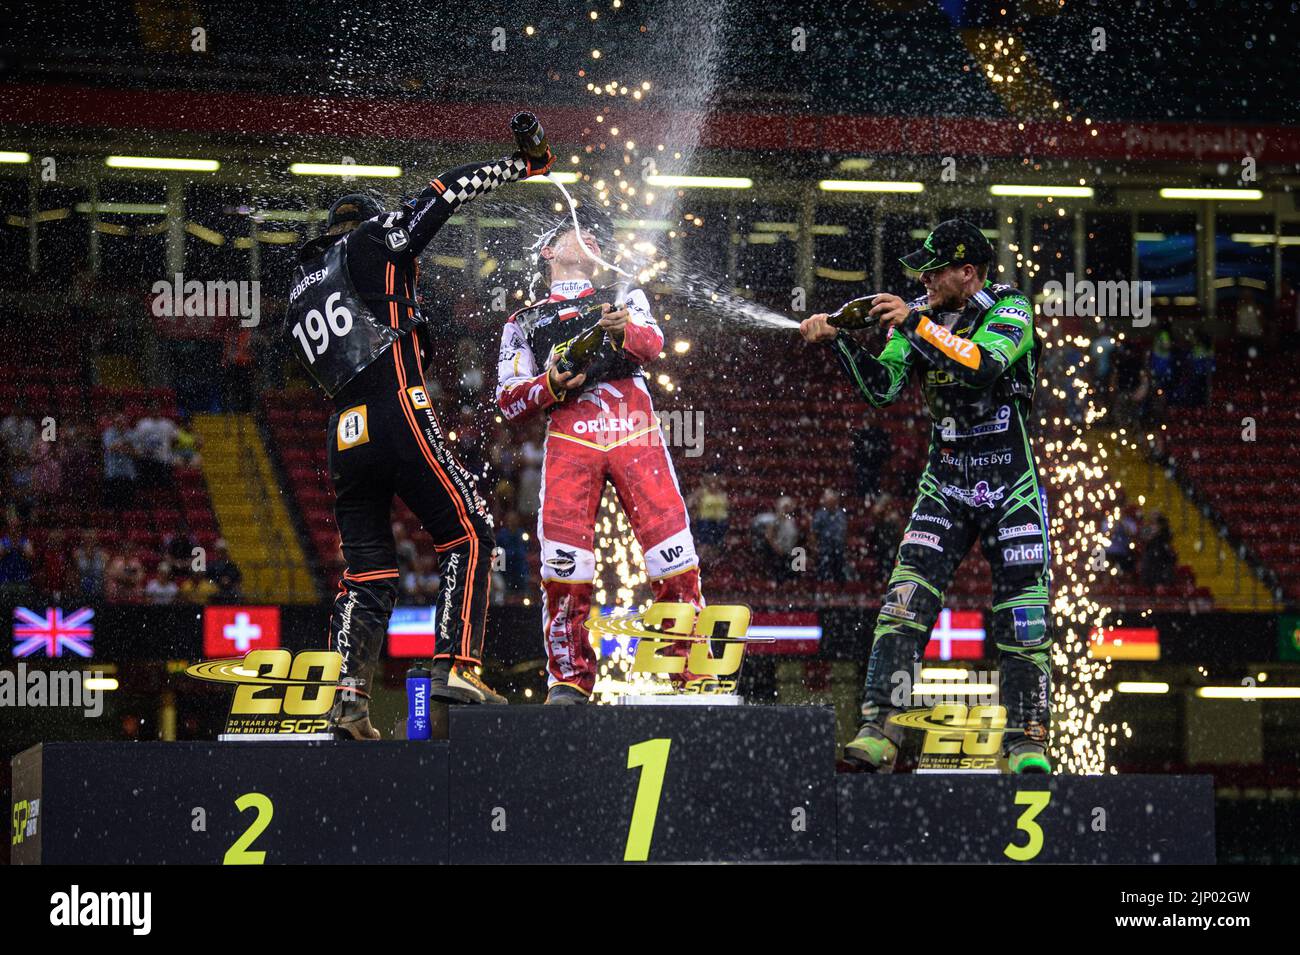 Champagne celebrations during the FIM Speedway Grand Prix 2 of Great Britain at the Principality Stadium, Cardiff on Sunday 14th August 2022. (Credit: Ian Charles | MI News) Credit: MI News & Sport /Alamy Live News Stock Photo